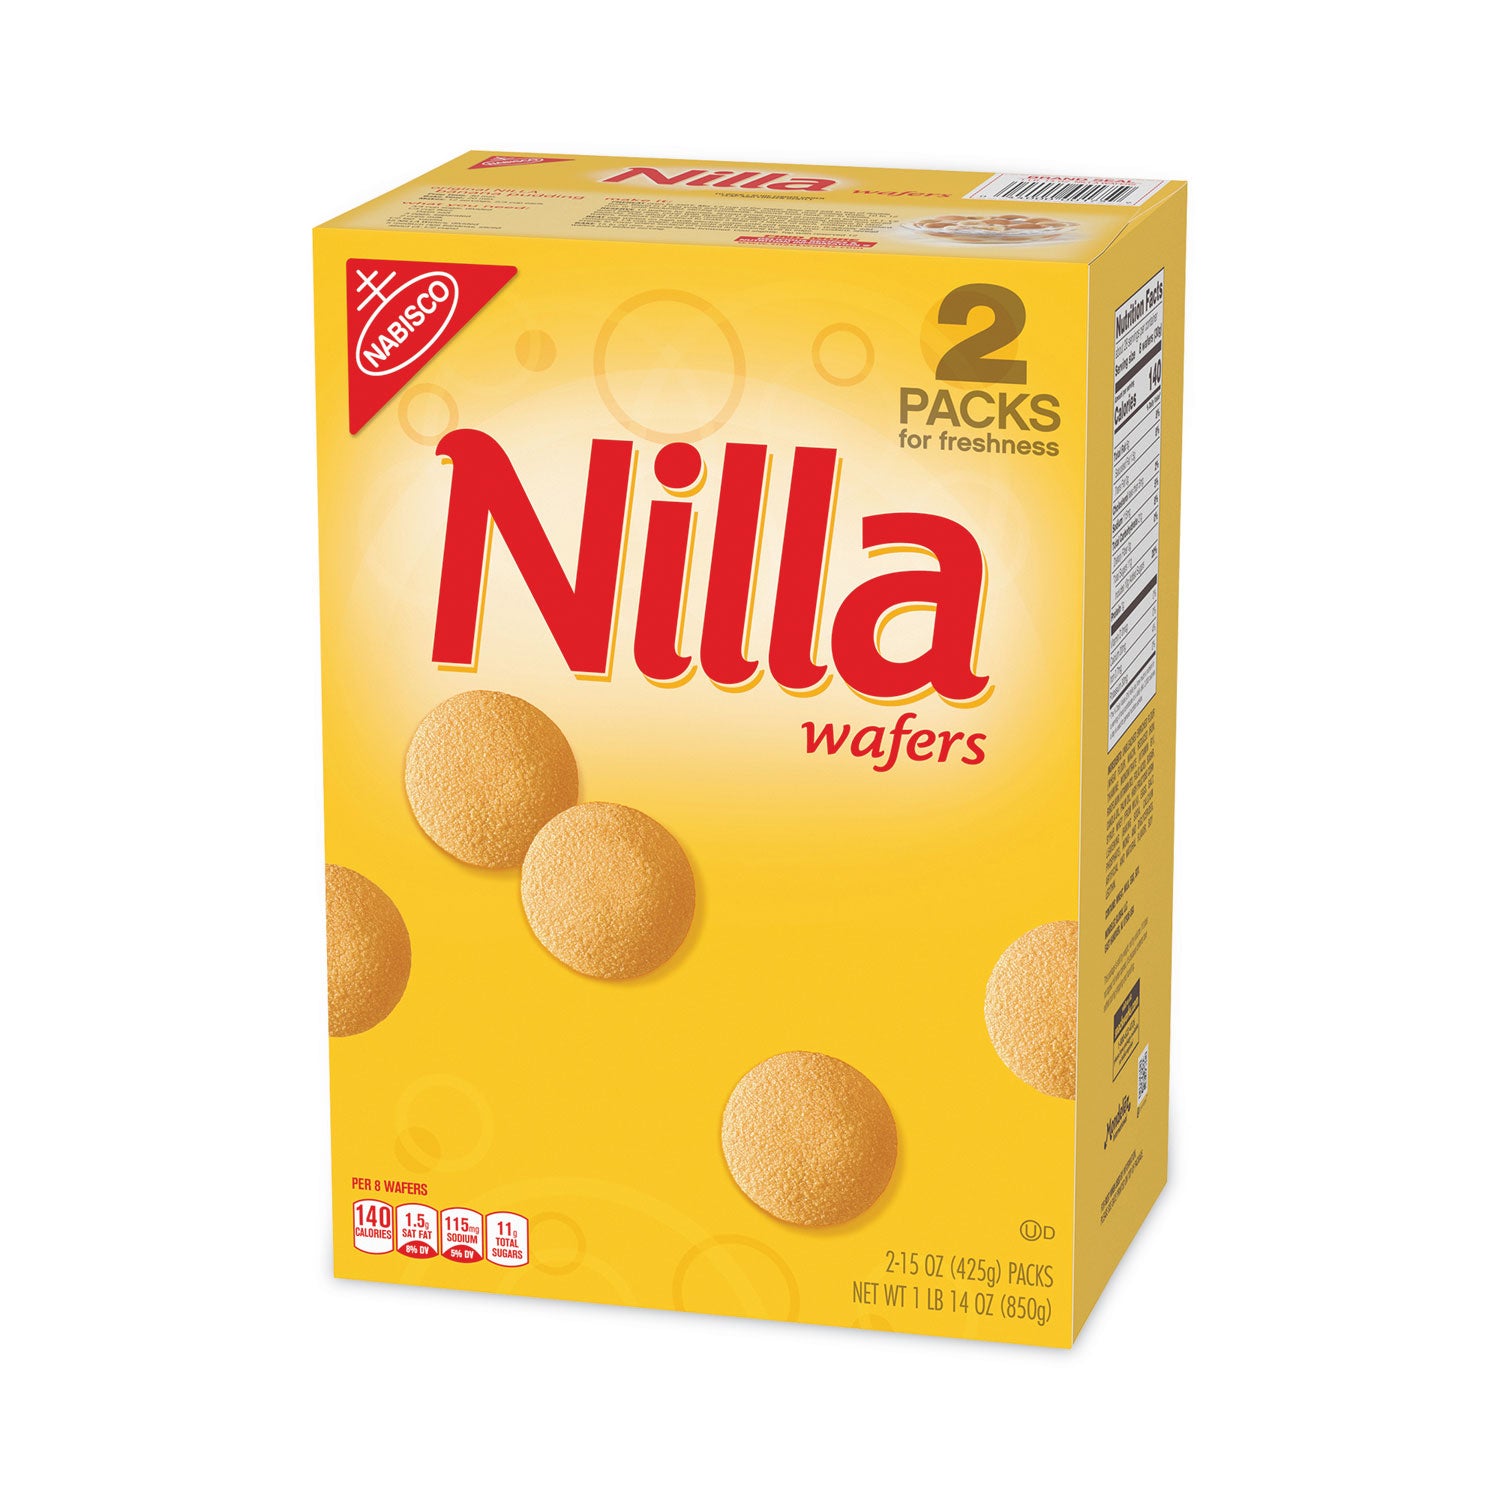 nilla-wafers-15-oz-box-2-boxes-pack-ships-in-1-3-business-days_grr22000427 - 2